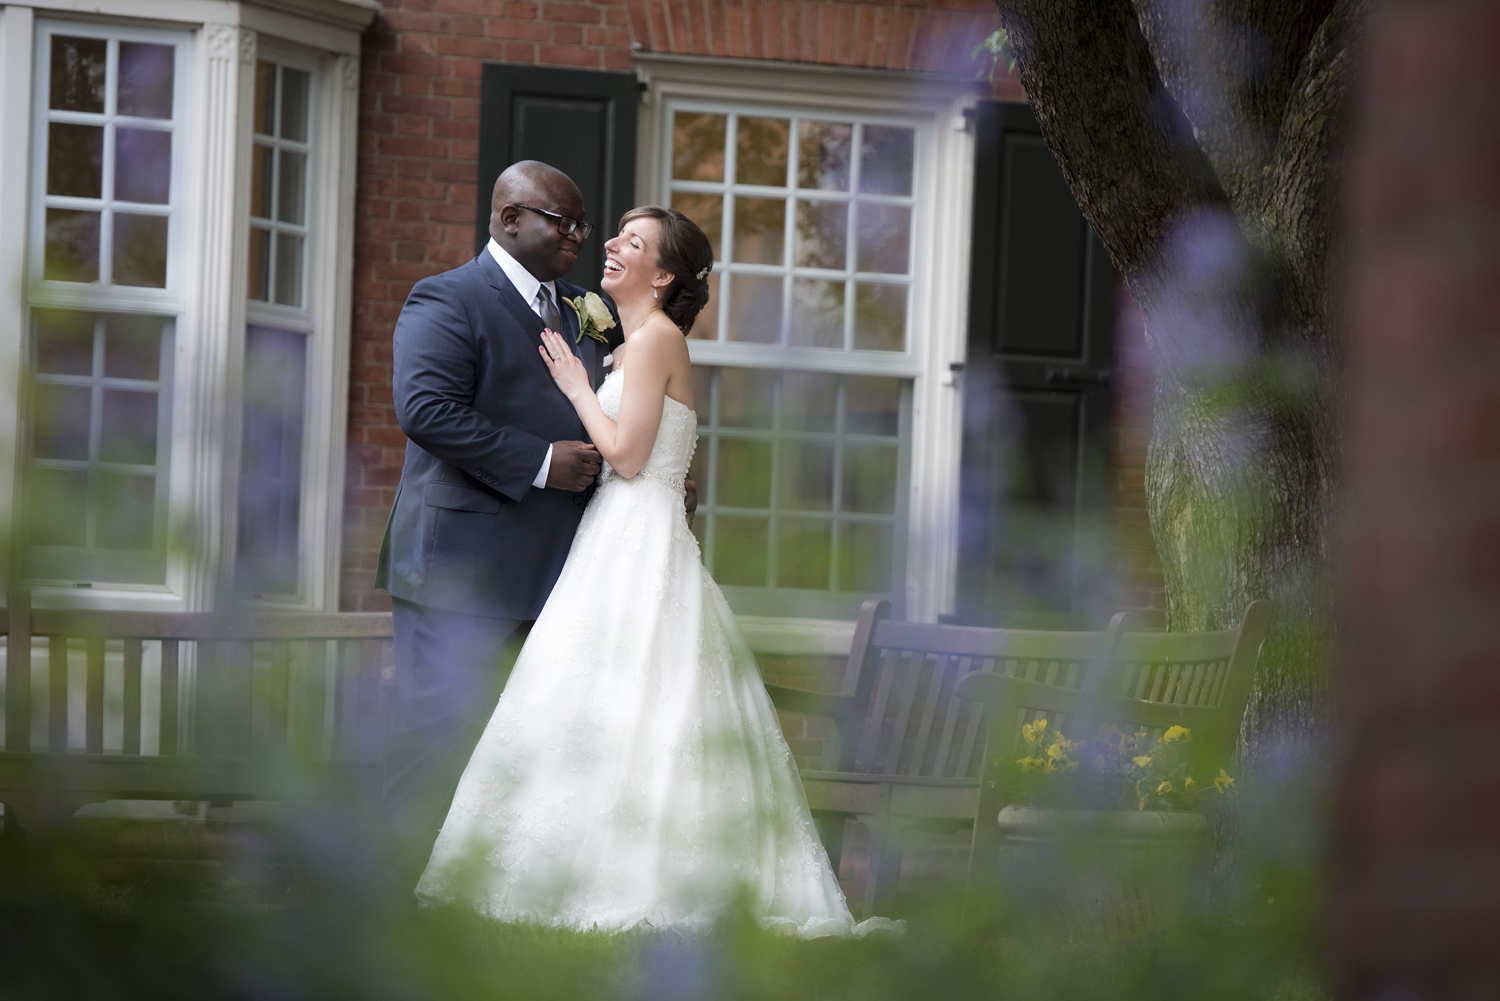 Biracial bride and groom laughing on their wedding day at Yale Divinity School in New Haven, CT.  